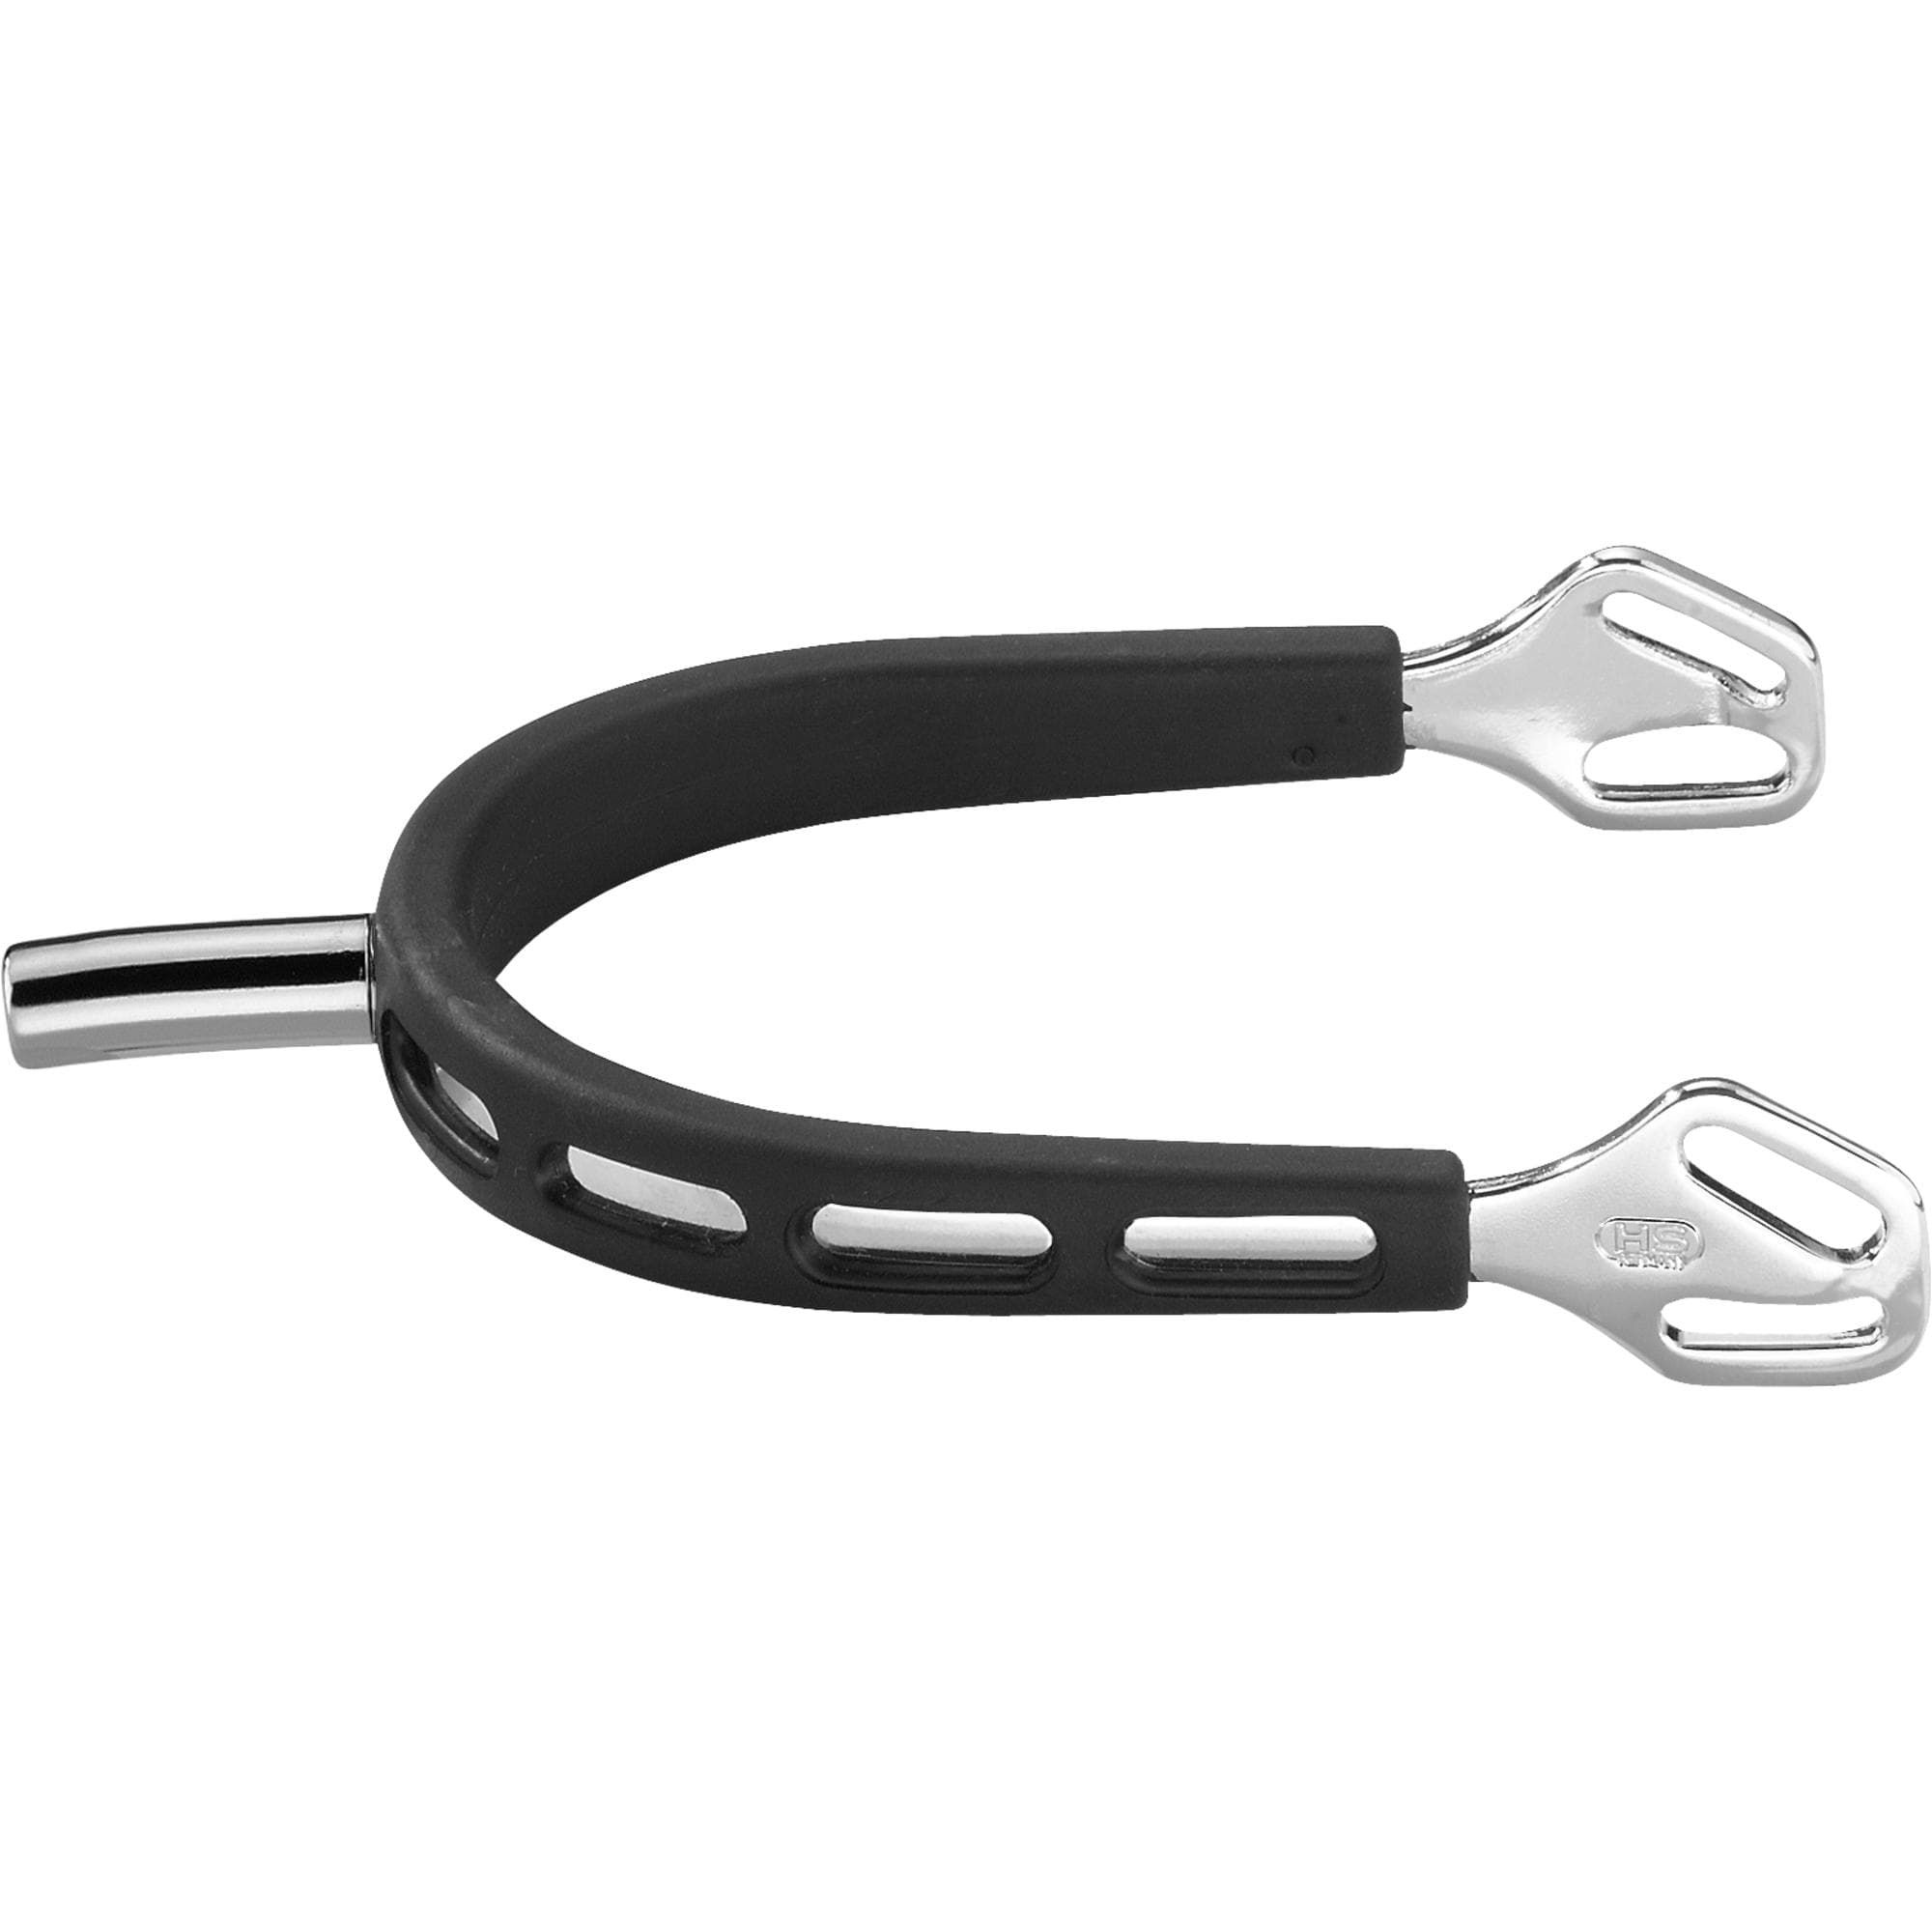 Eperons ultra grip bout carré 25 mm Sprenger - Equestra